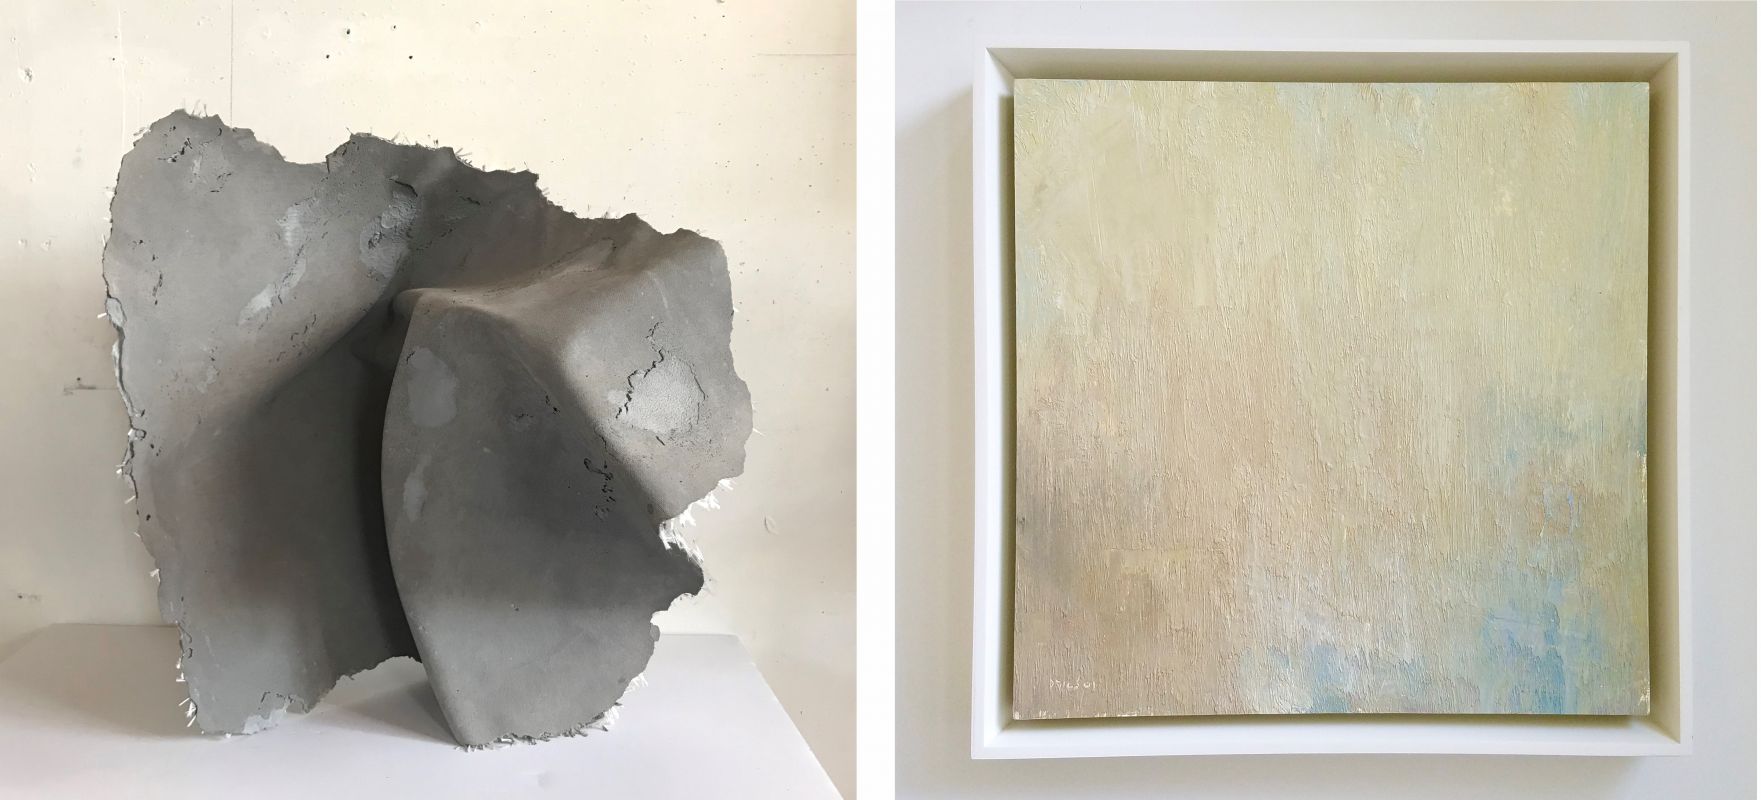 (Left) Sarah Thompson Moore (BFA '15), The Weight of Intention, 2014, concrete and glass fiber, 22" x 22" x 16 / (Right) Stuart Shils (Certificate 1982), Cliffs and Bay Lost in a Sunset Glare, 2001, oil on prepared paper mounted on panel, 13" x 13"